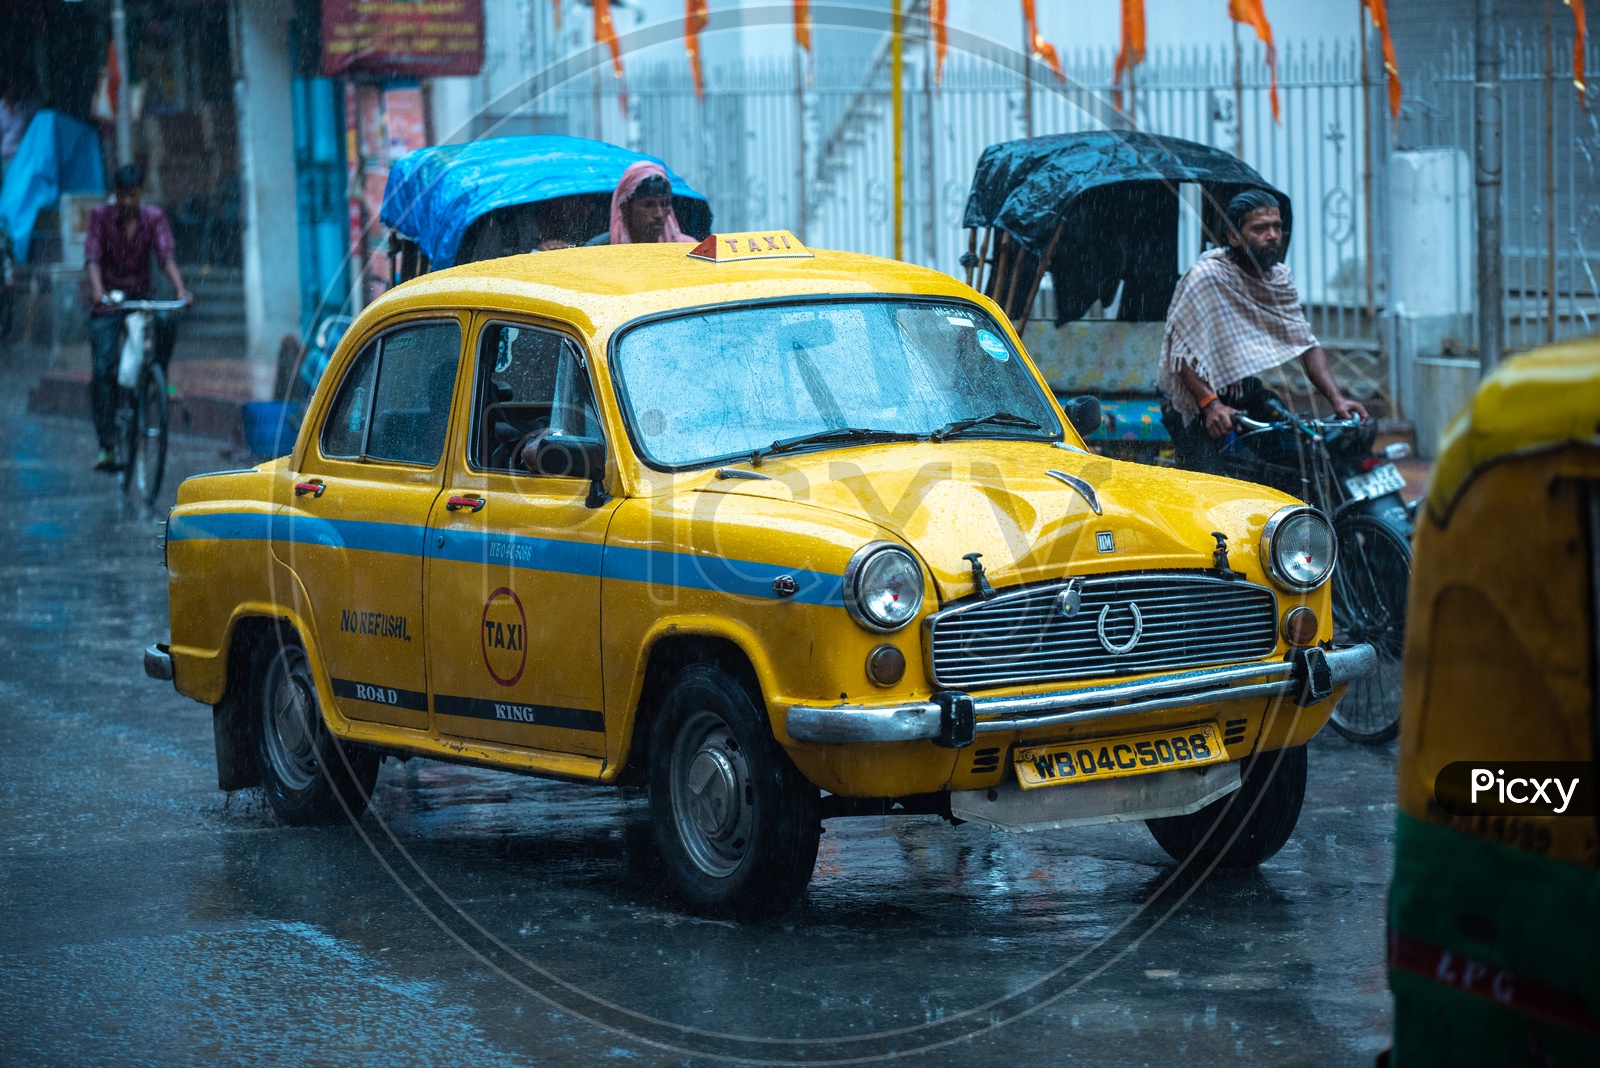 Yellow Cabs Or taxis  Running On the Roads Of Howrah in Heavy Rain Due To Cyclone Fani